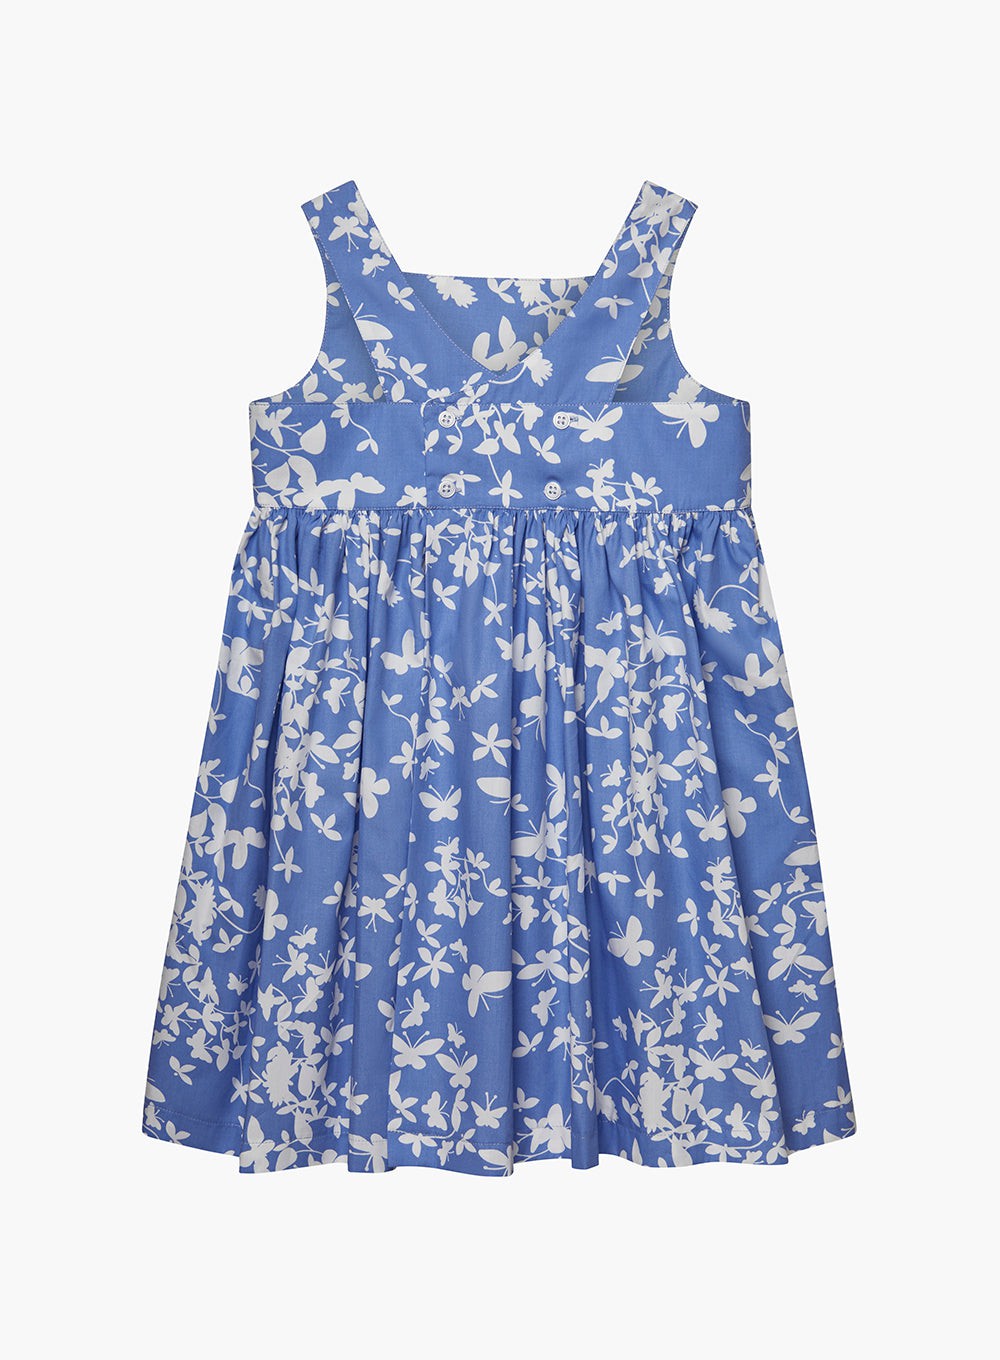 Confiture Dress Adelina Summer Dress in Blue Butterfly